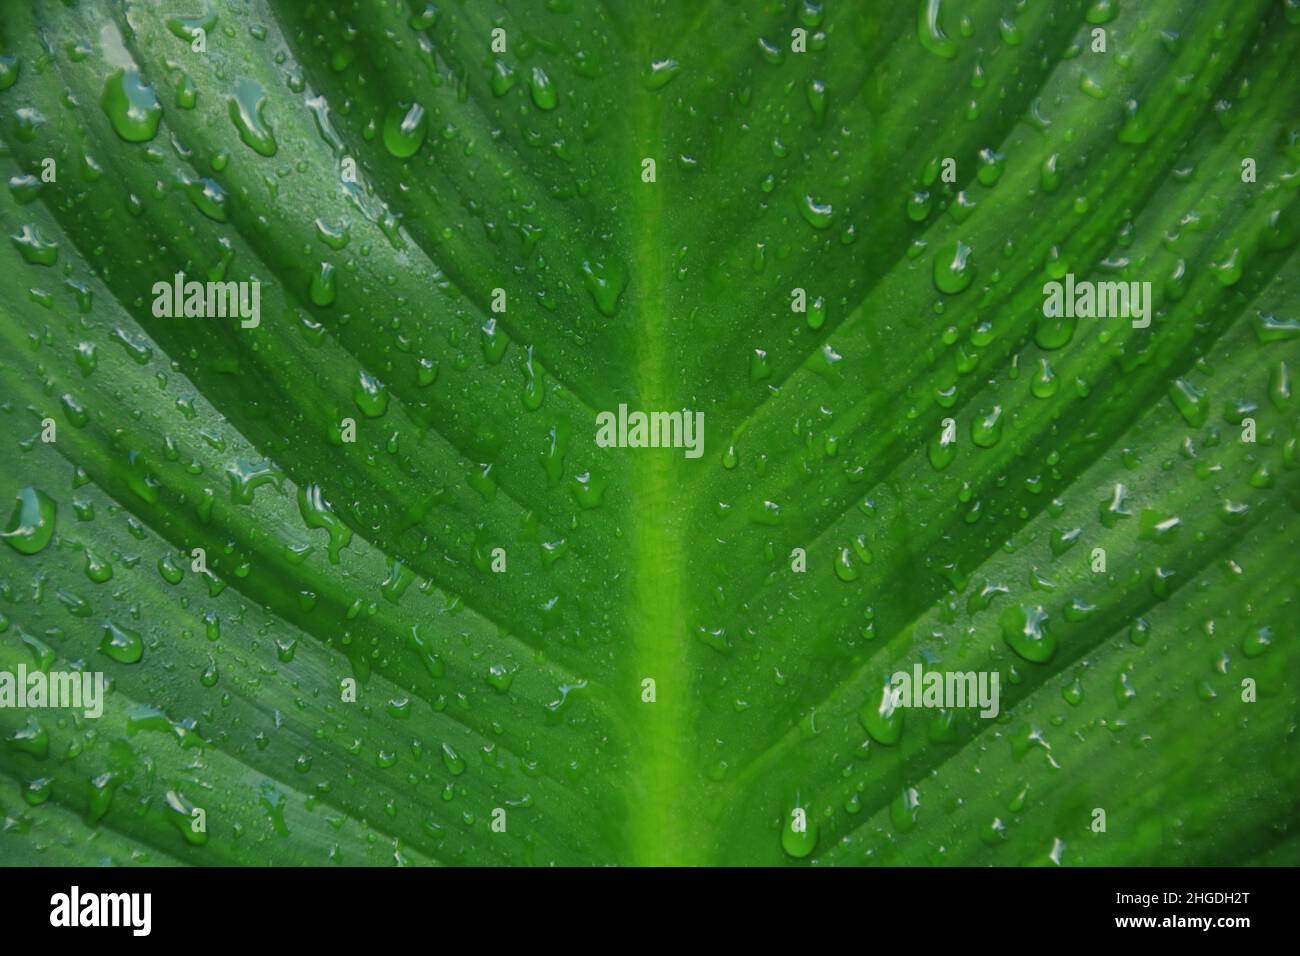 Fresh Green Leaf With Dew Drops Stock Photo